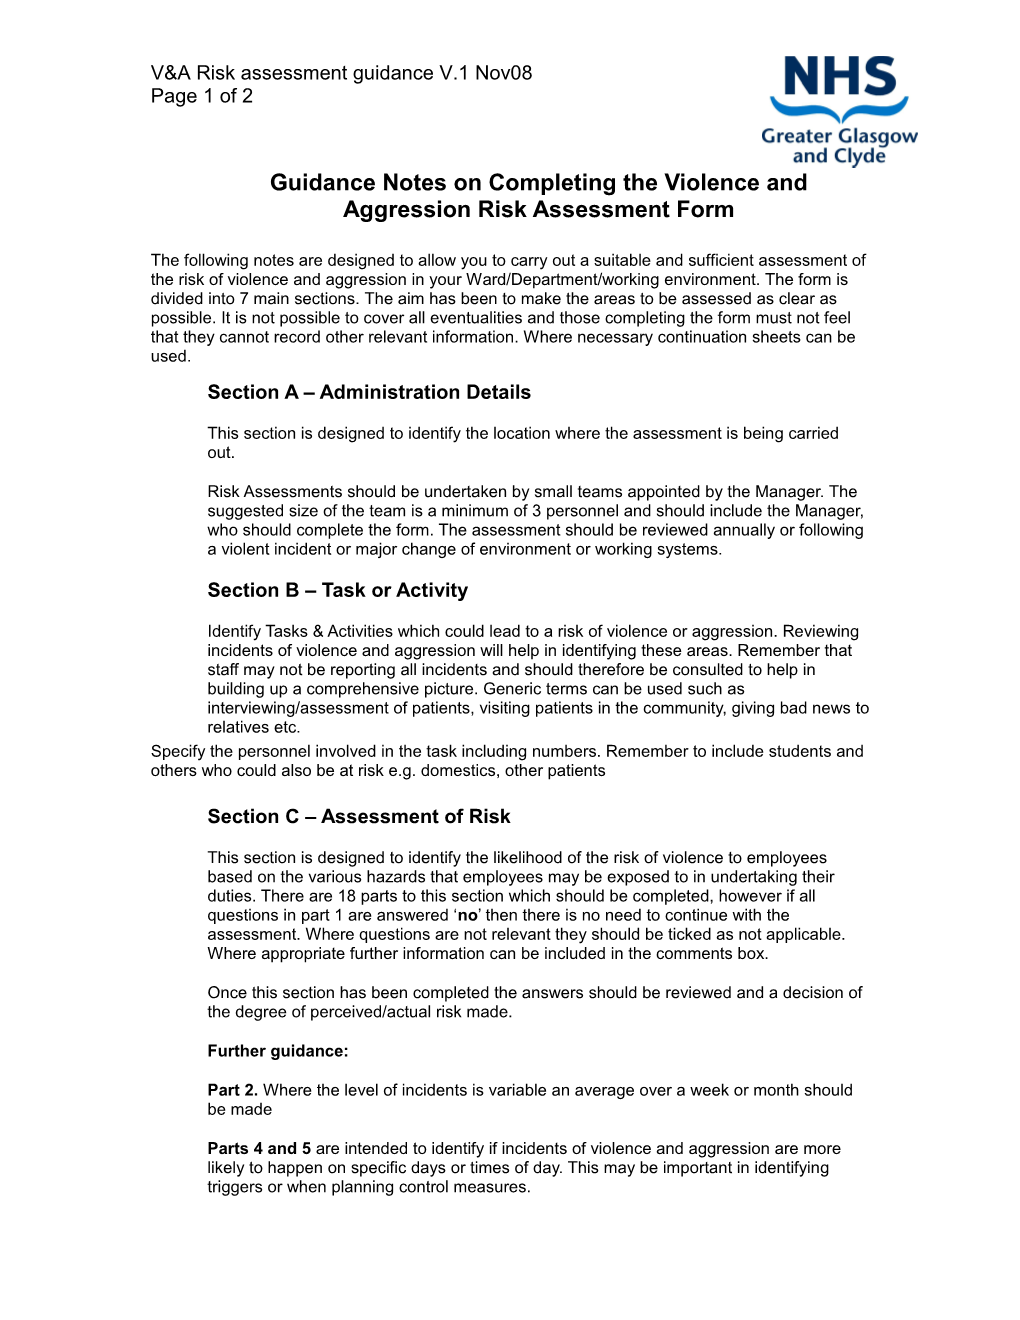 Guidance Notes on Completing the Violence and Aggression Risk Assessment Form